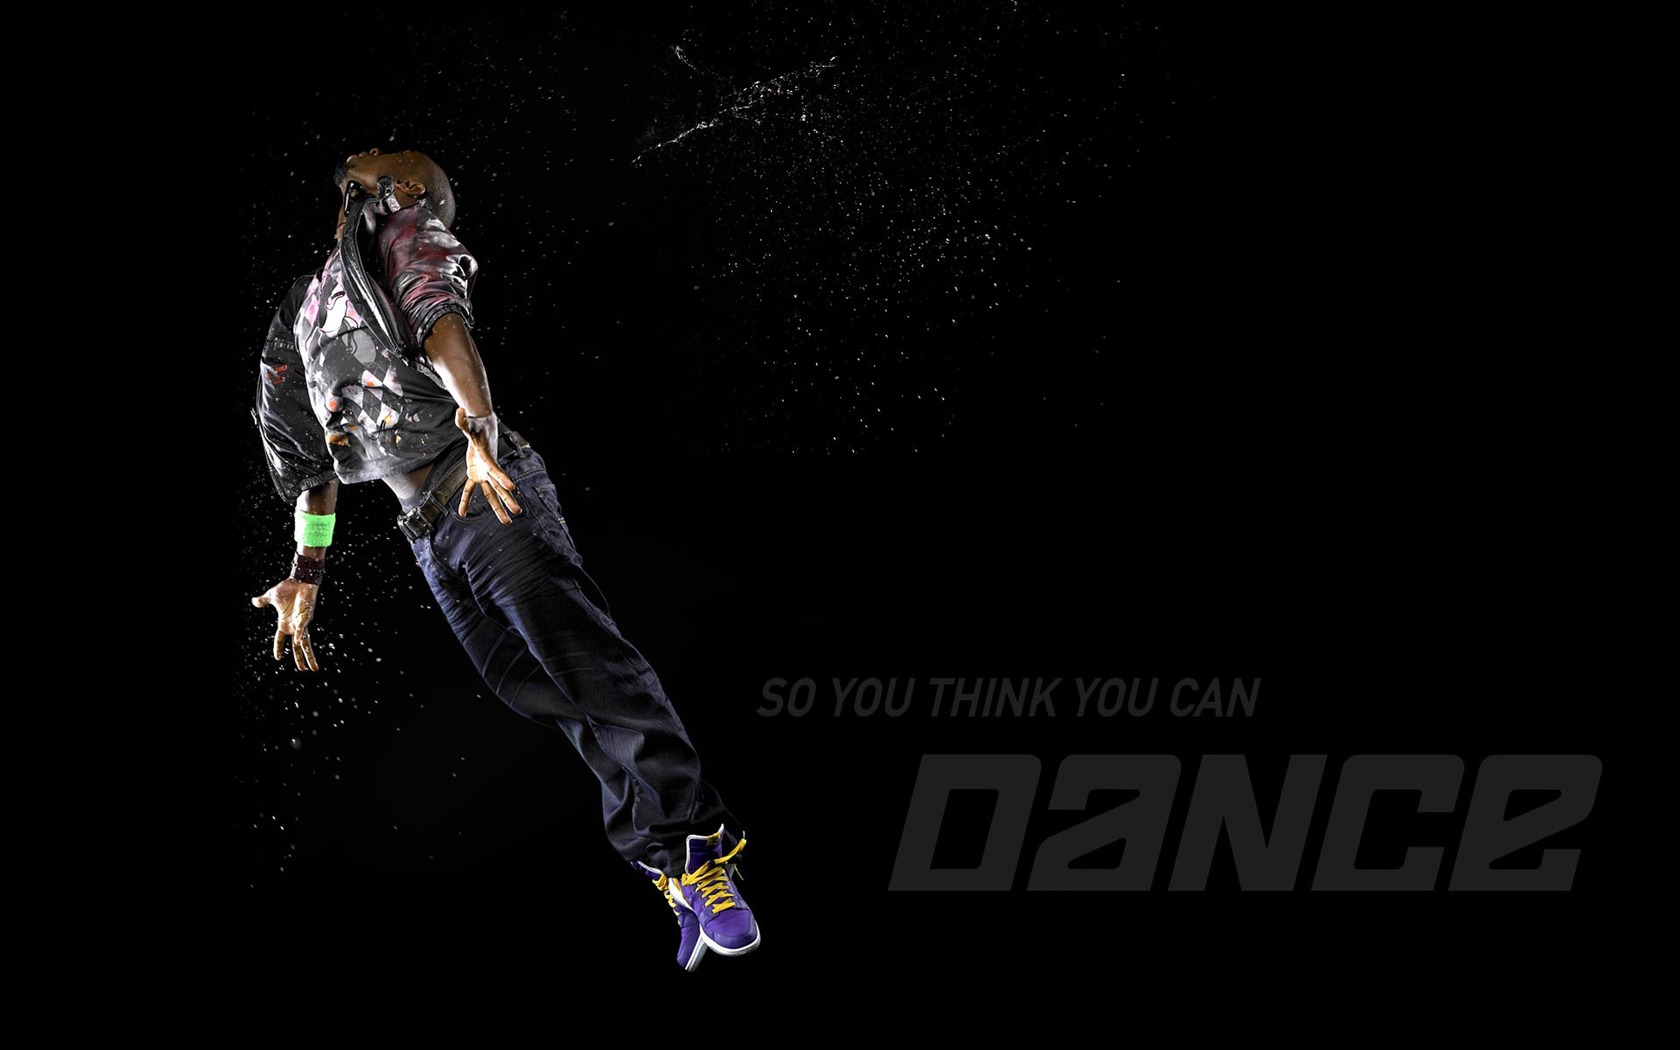 So You Think You Can Dance 舞林争霸 壁纸(一)10 - 1680x1050